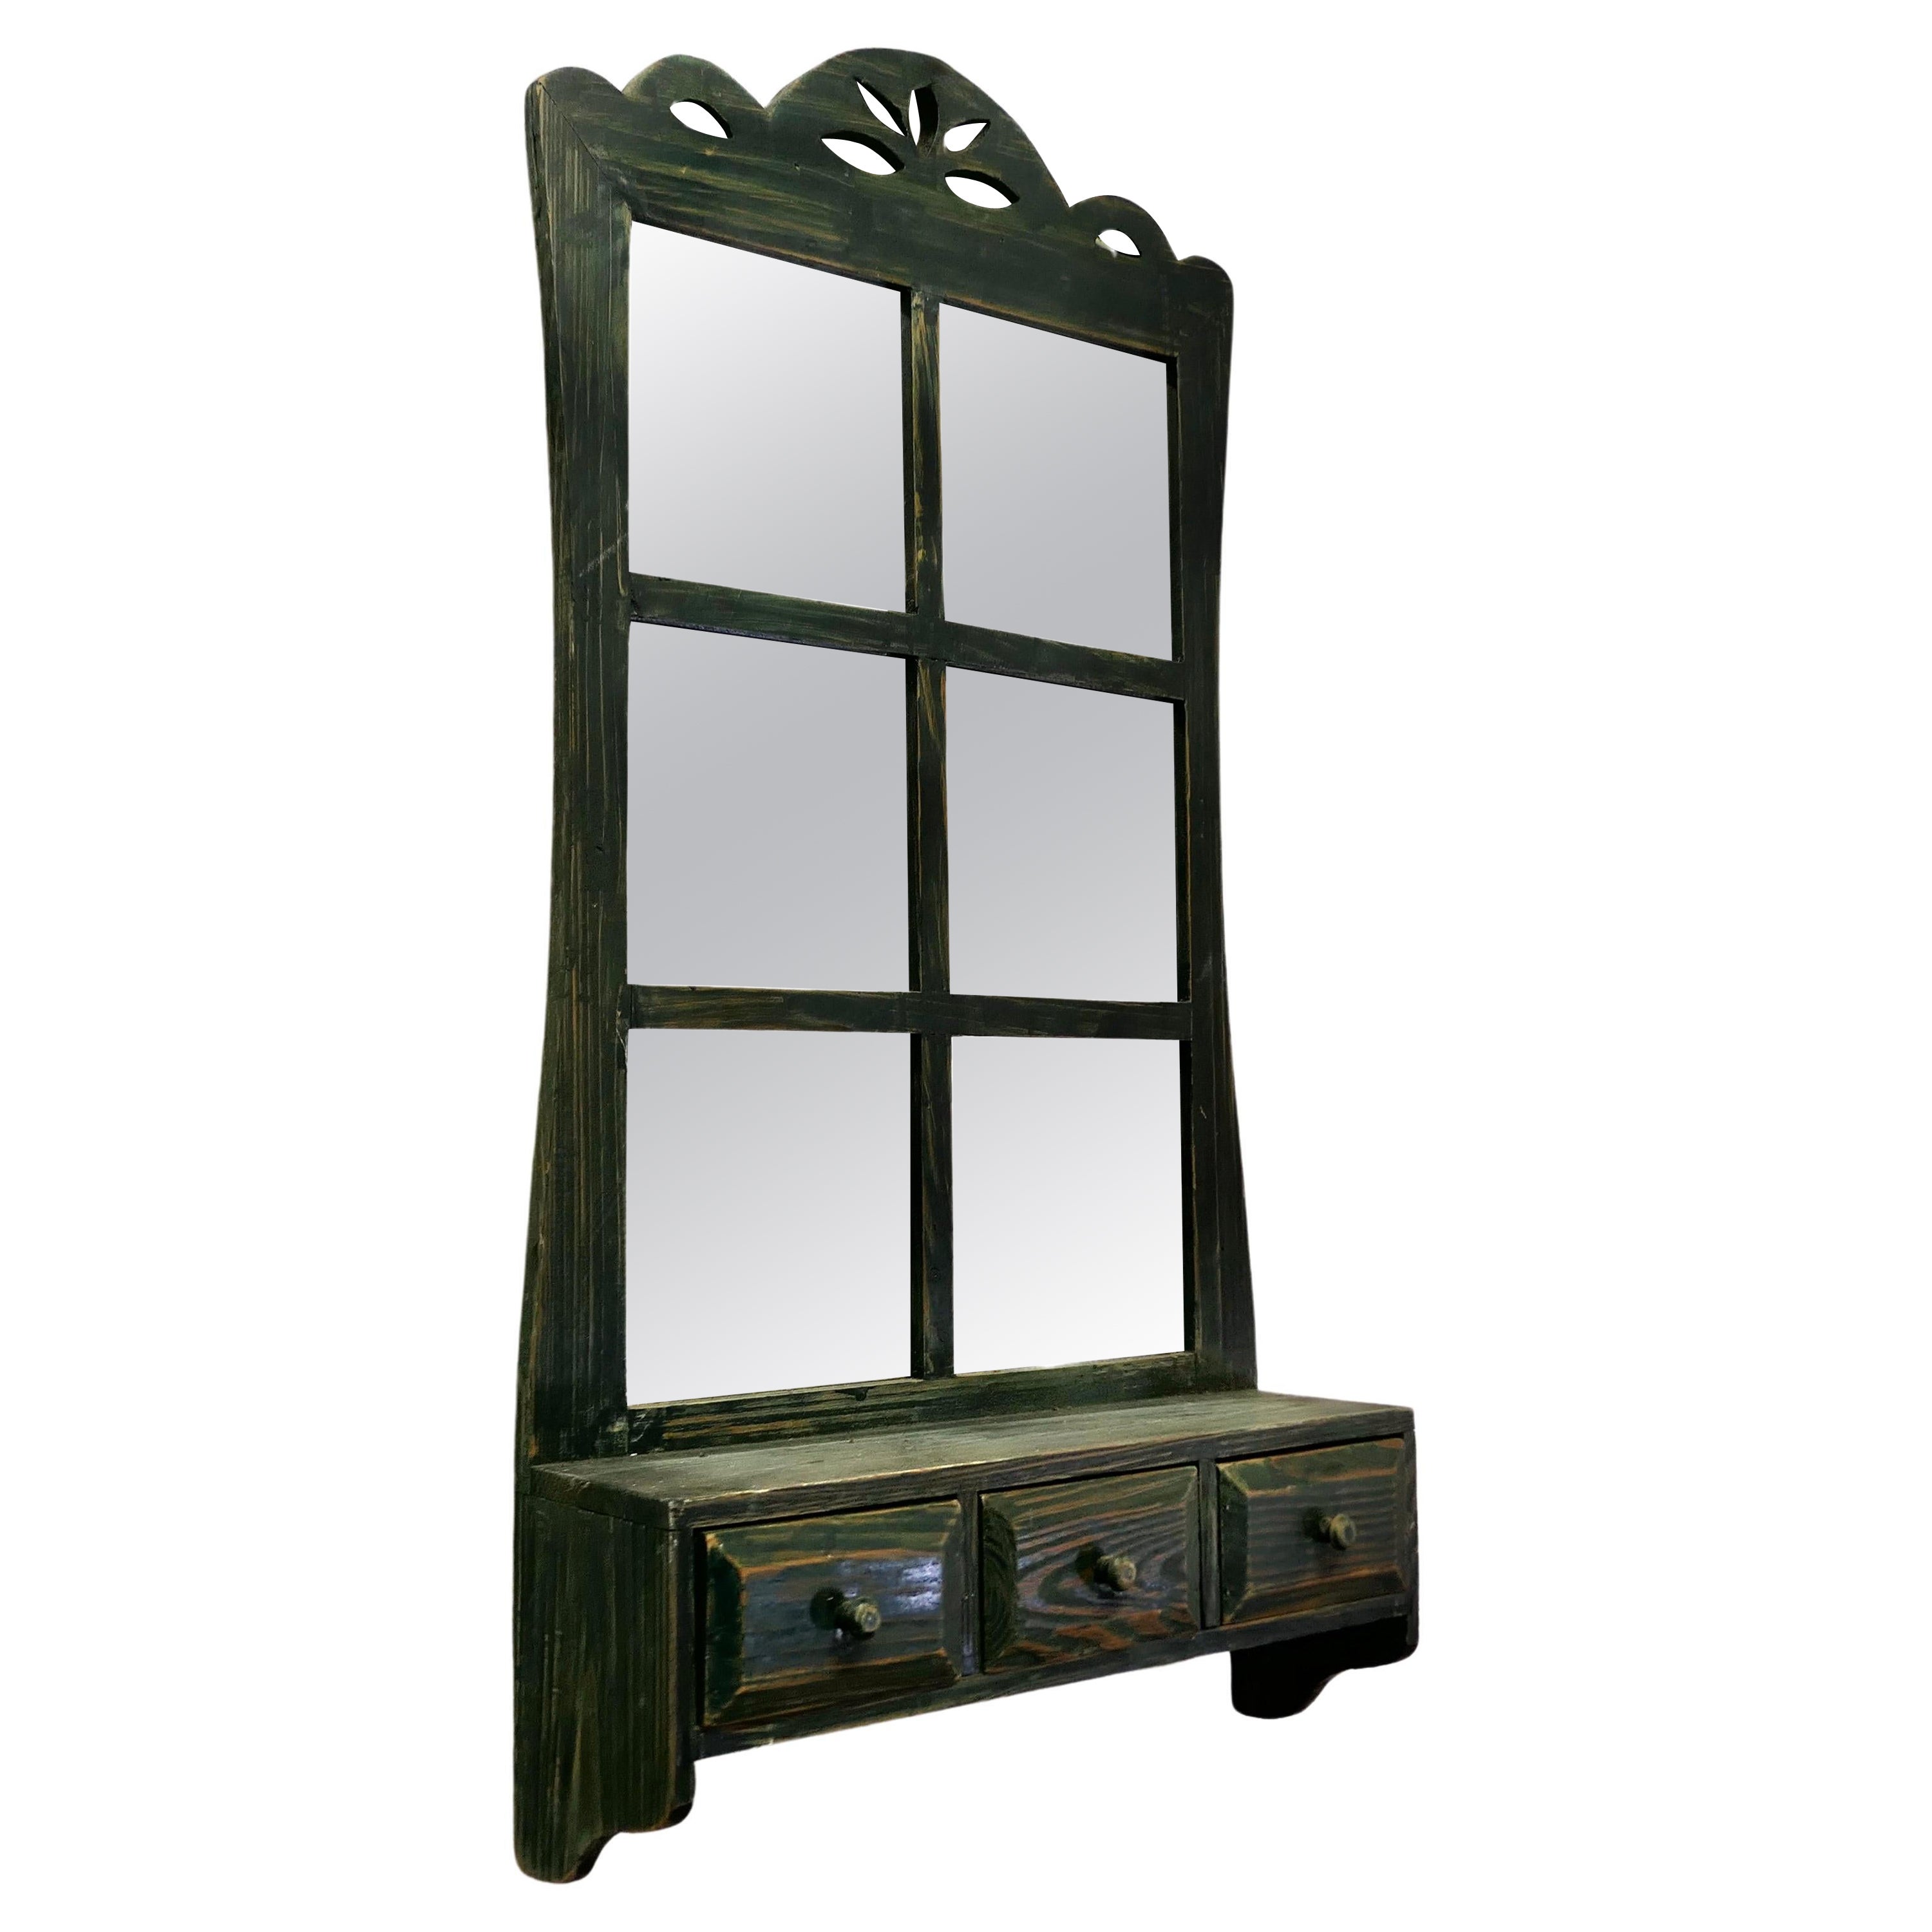 Wall Hanging Window Mirror with Drawers, Cloakroom or Bathroom   